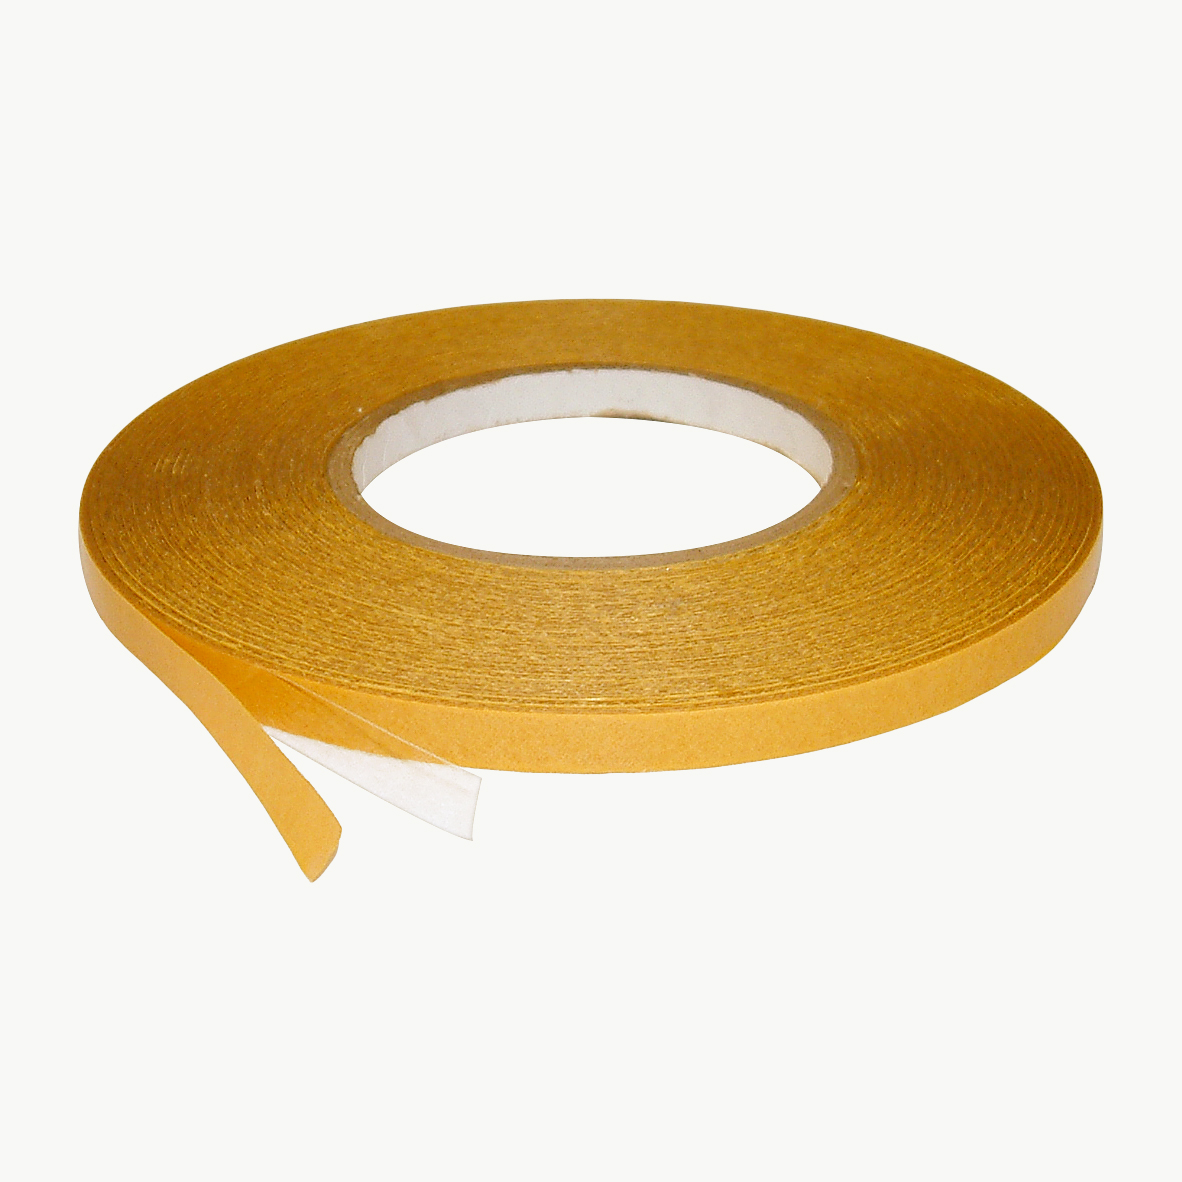 JVCC Double-Sided Polypropylene Film Tape [Acrylic Adhesive] (DC-PPF22)